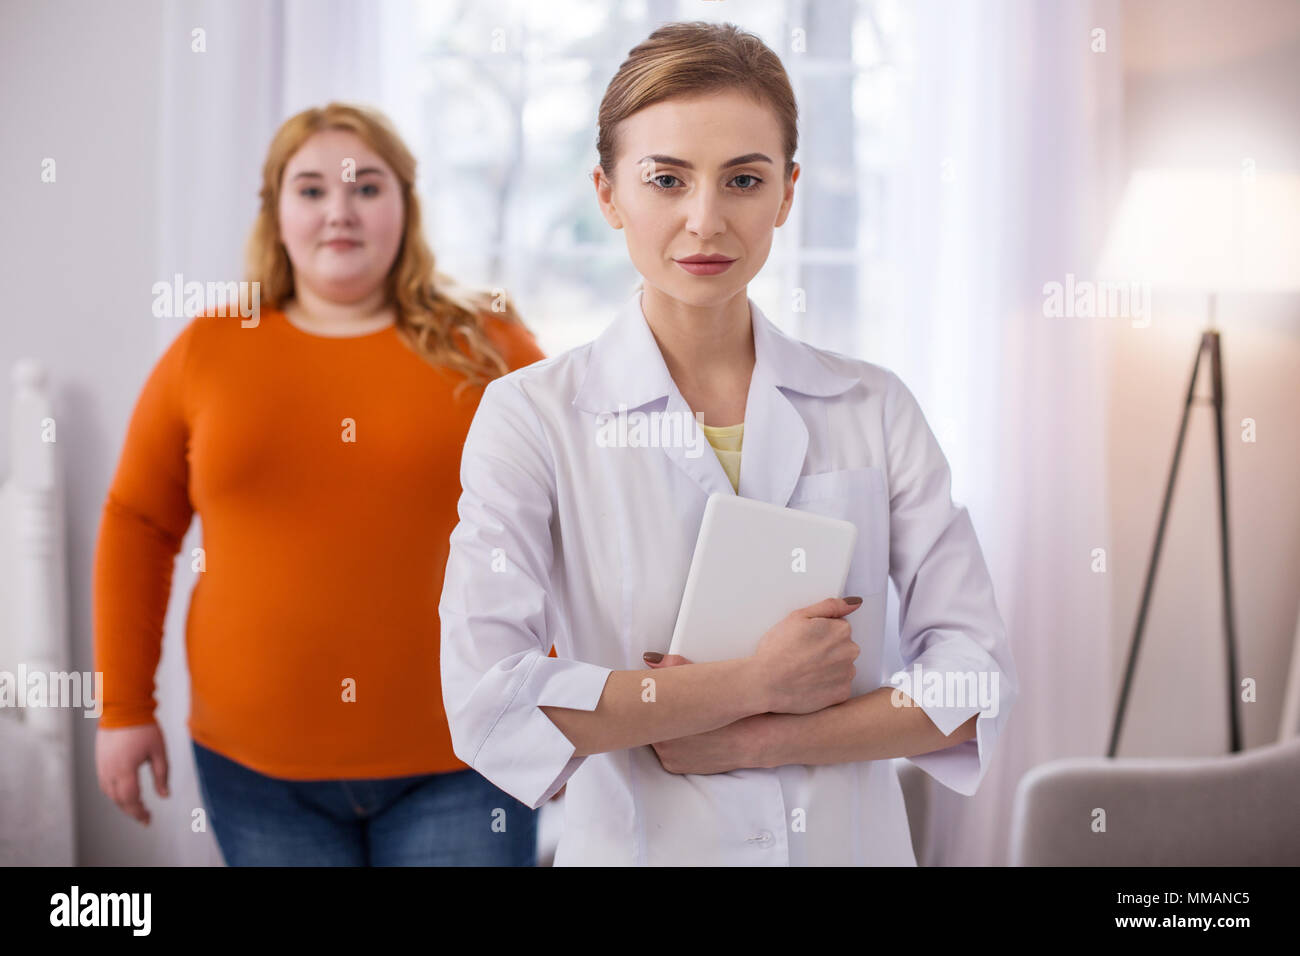 Determined nutrition specialist holding her tablet Stock Photo